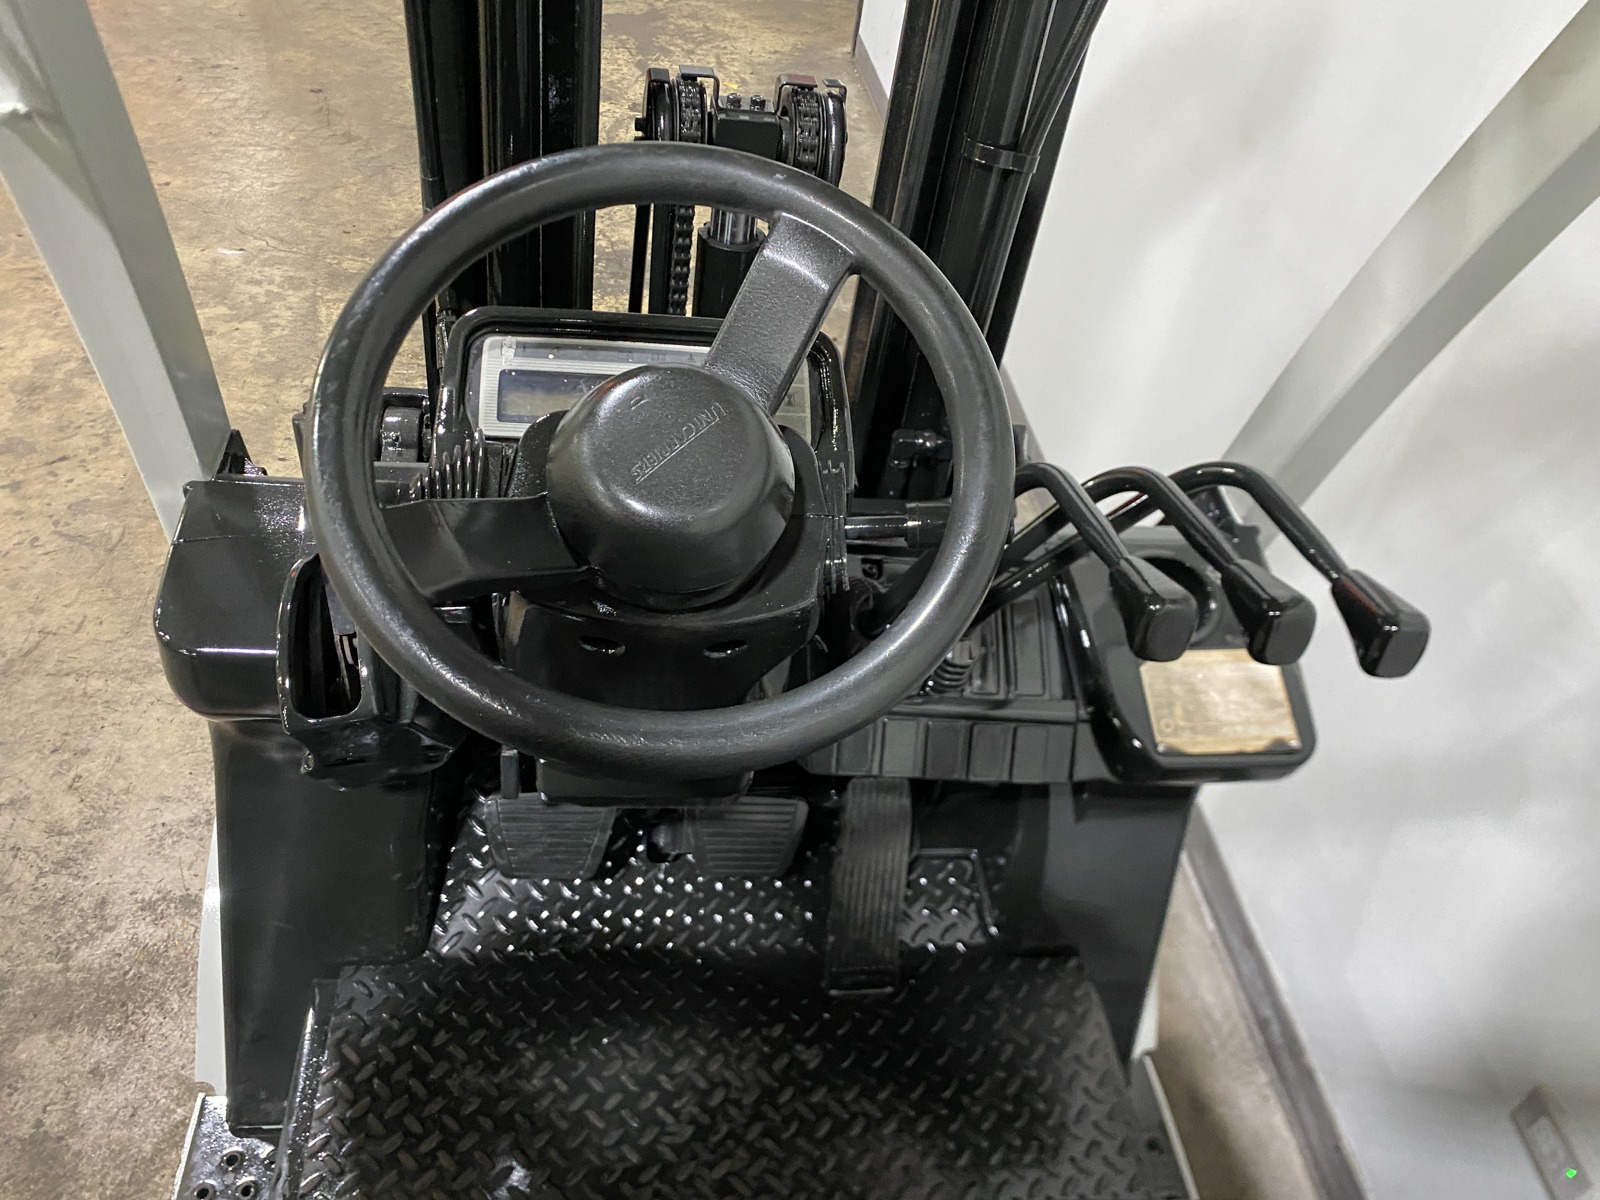 Used 2017 UNICARRIERS MP1F1A18LV  | Cary, IL